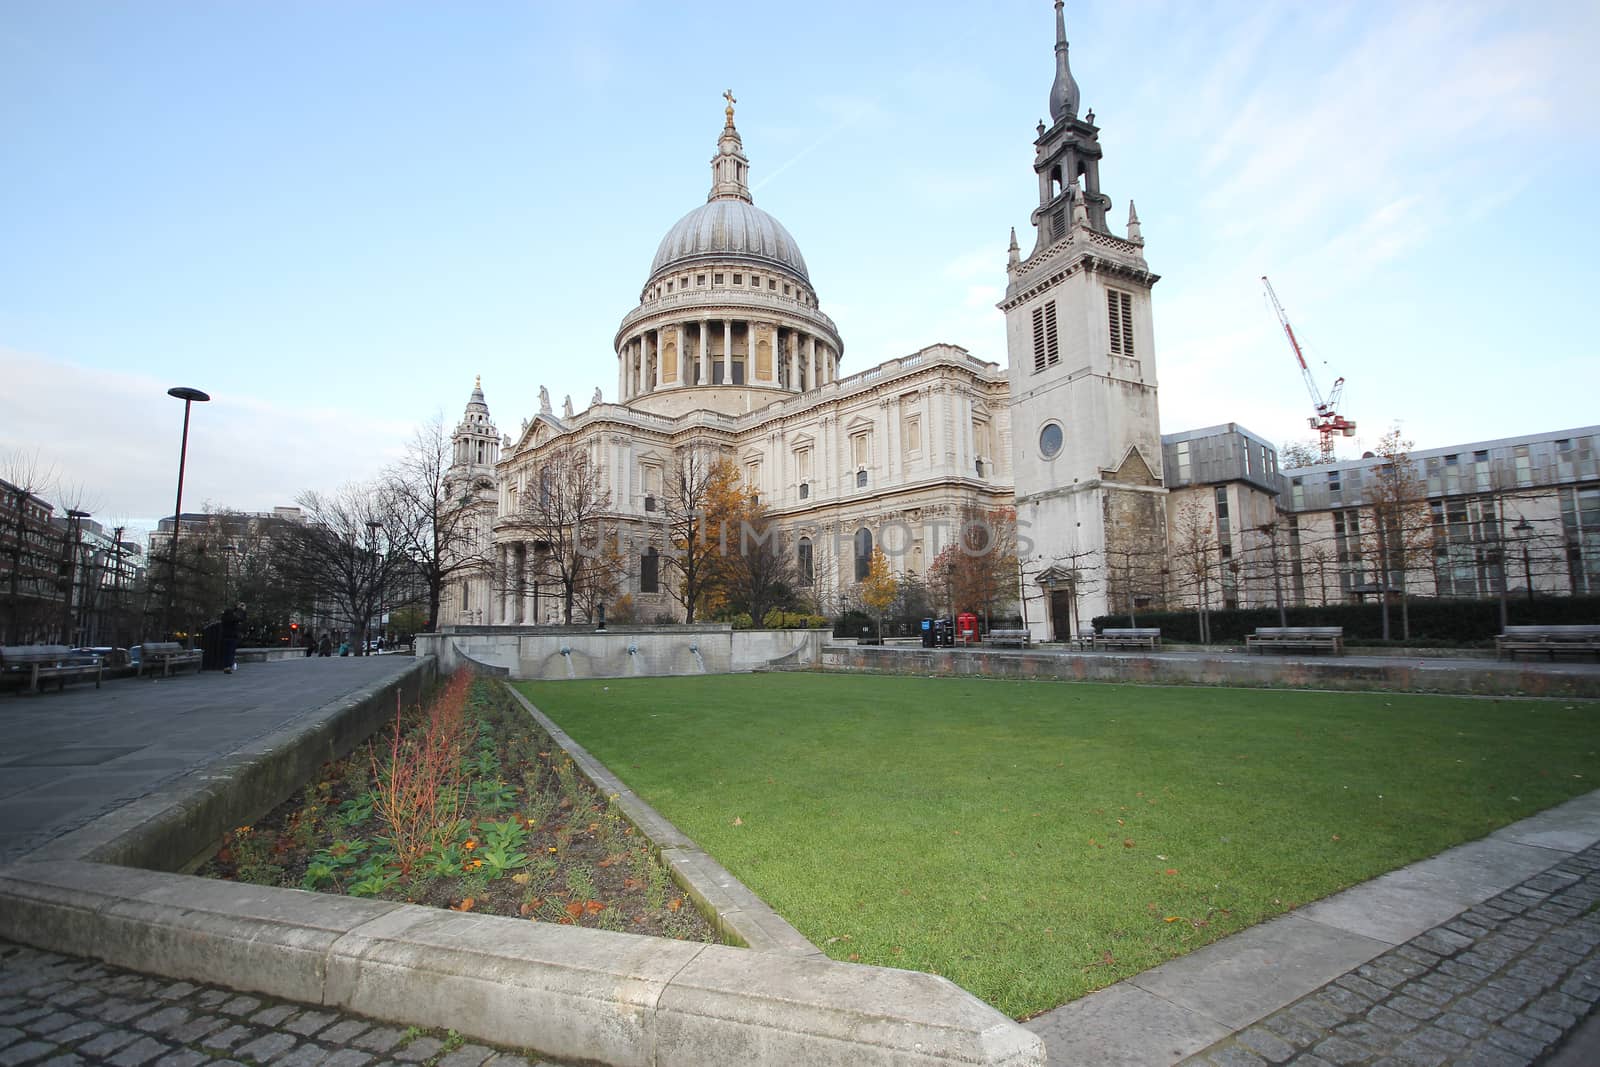 St. Paul Cathedral in London England  by pumppump